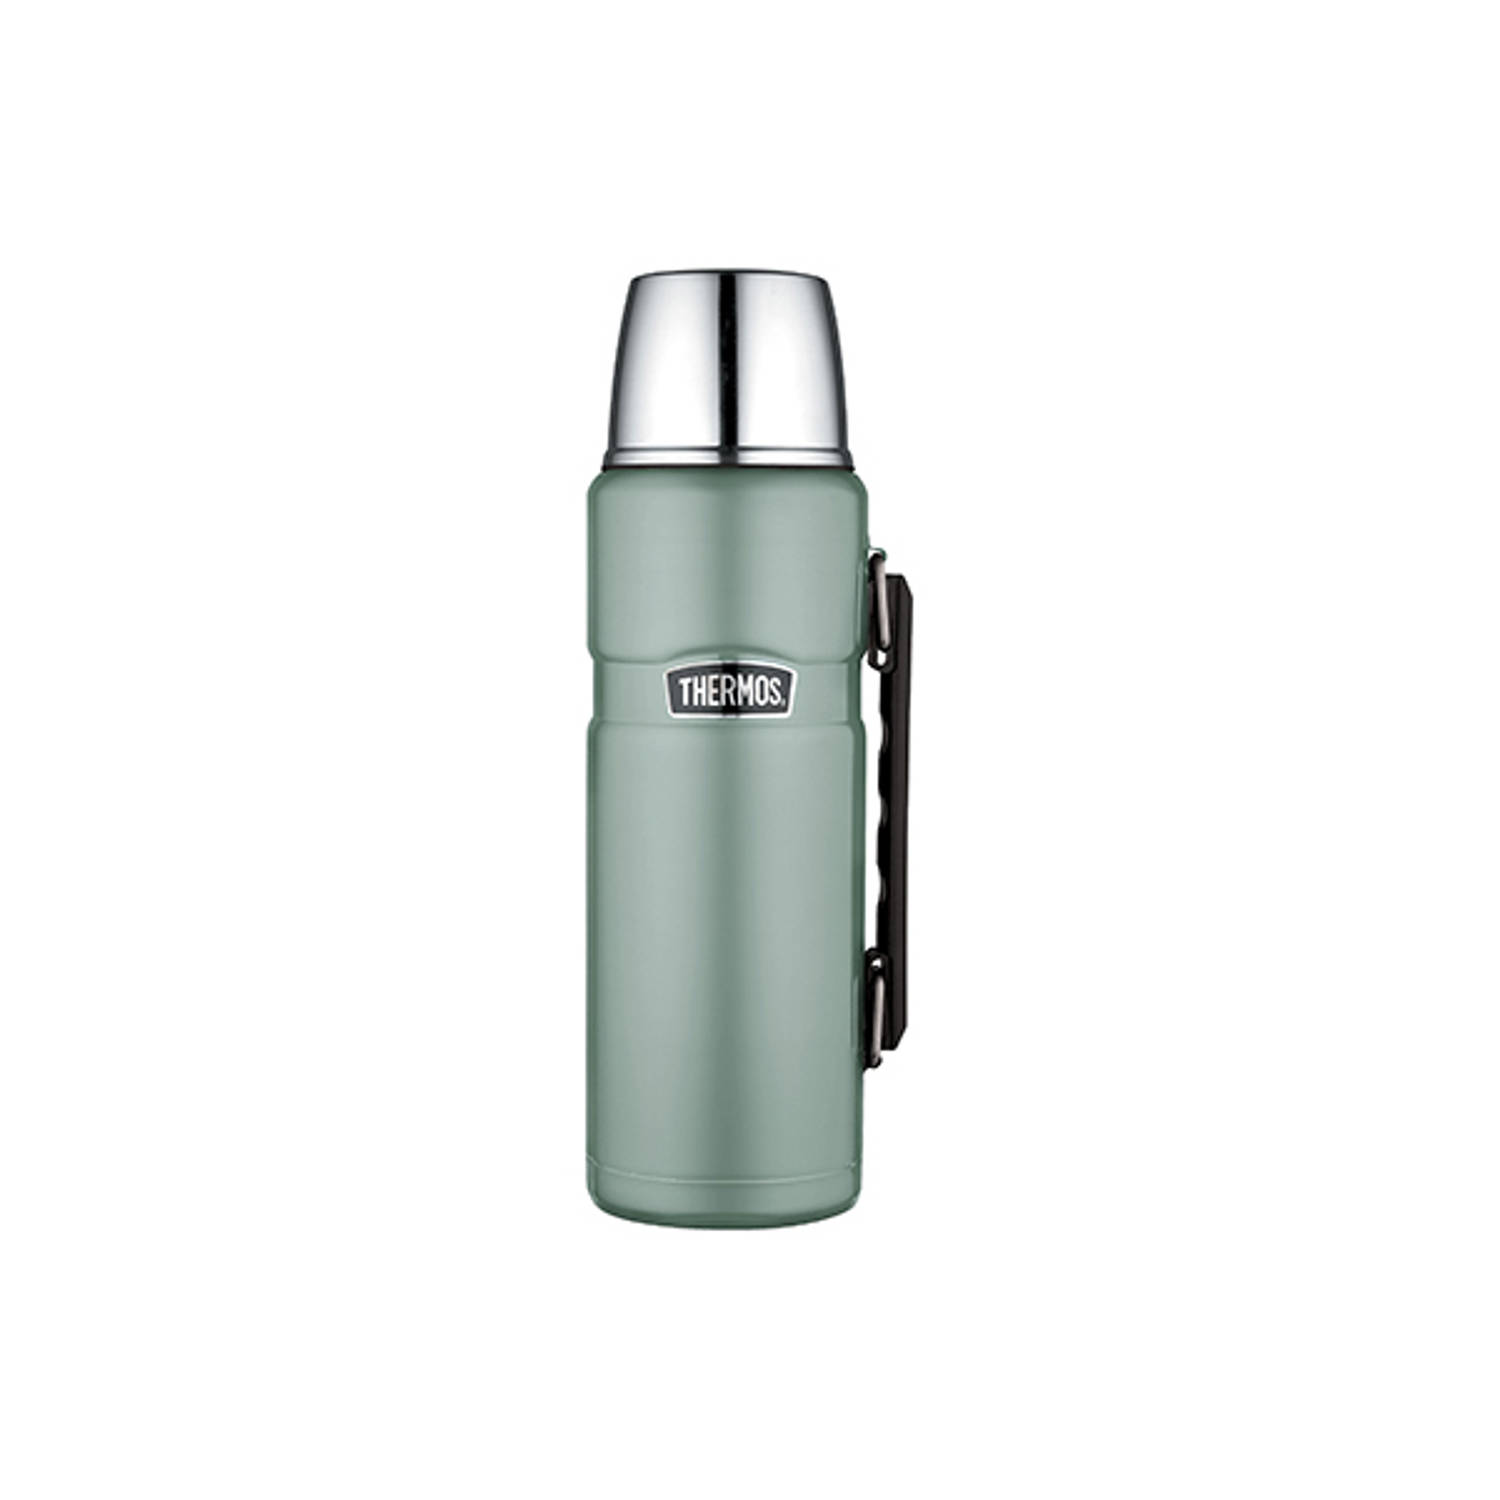 Thermos King Thermosfles - 1,2 Liter - Duckegg Groen